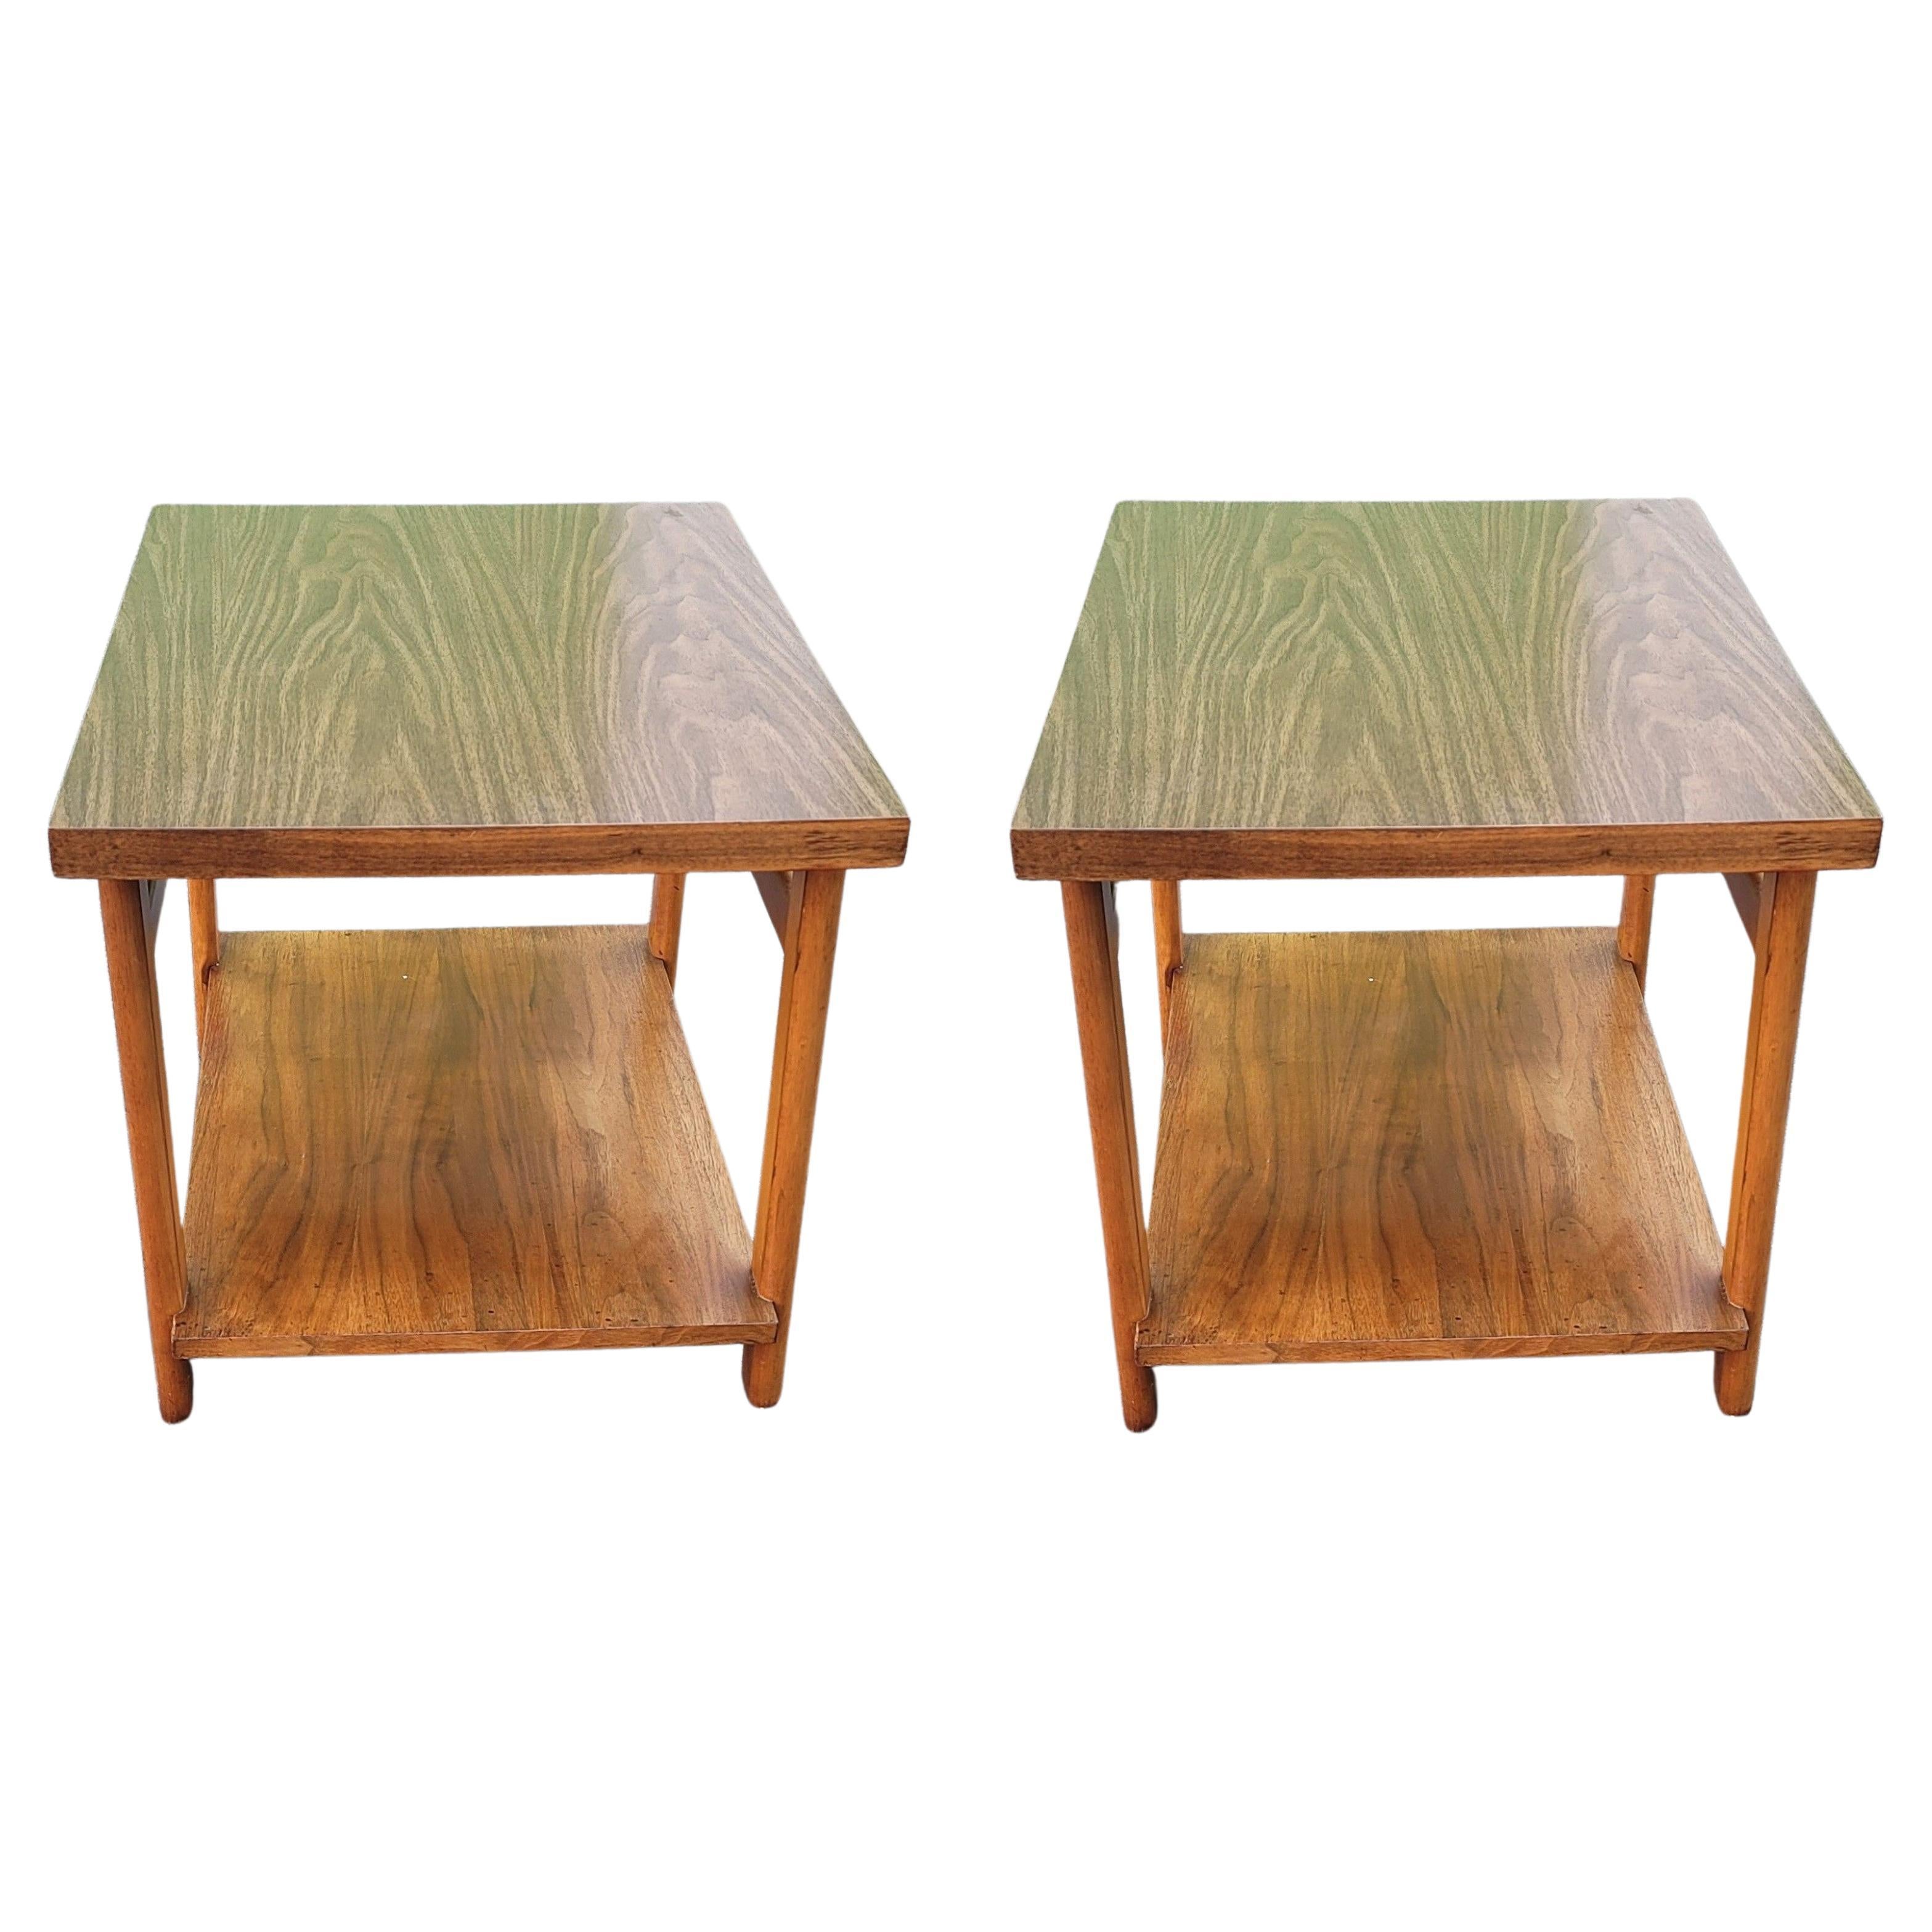 1960s Lane Altavista Two Tier Side Tables with Formica Top